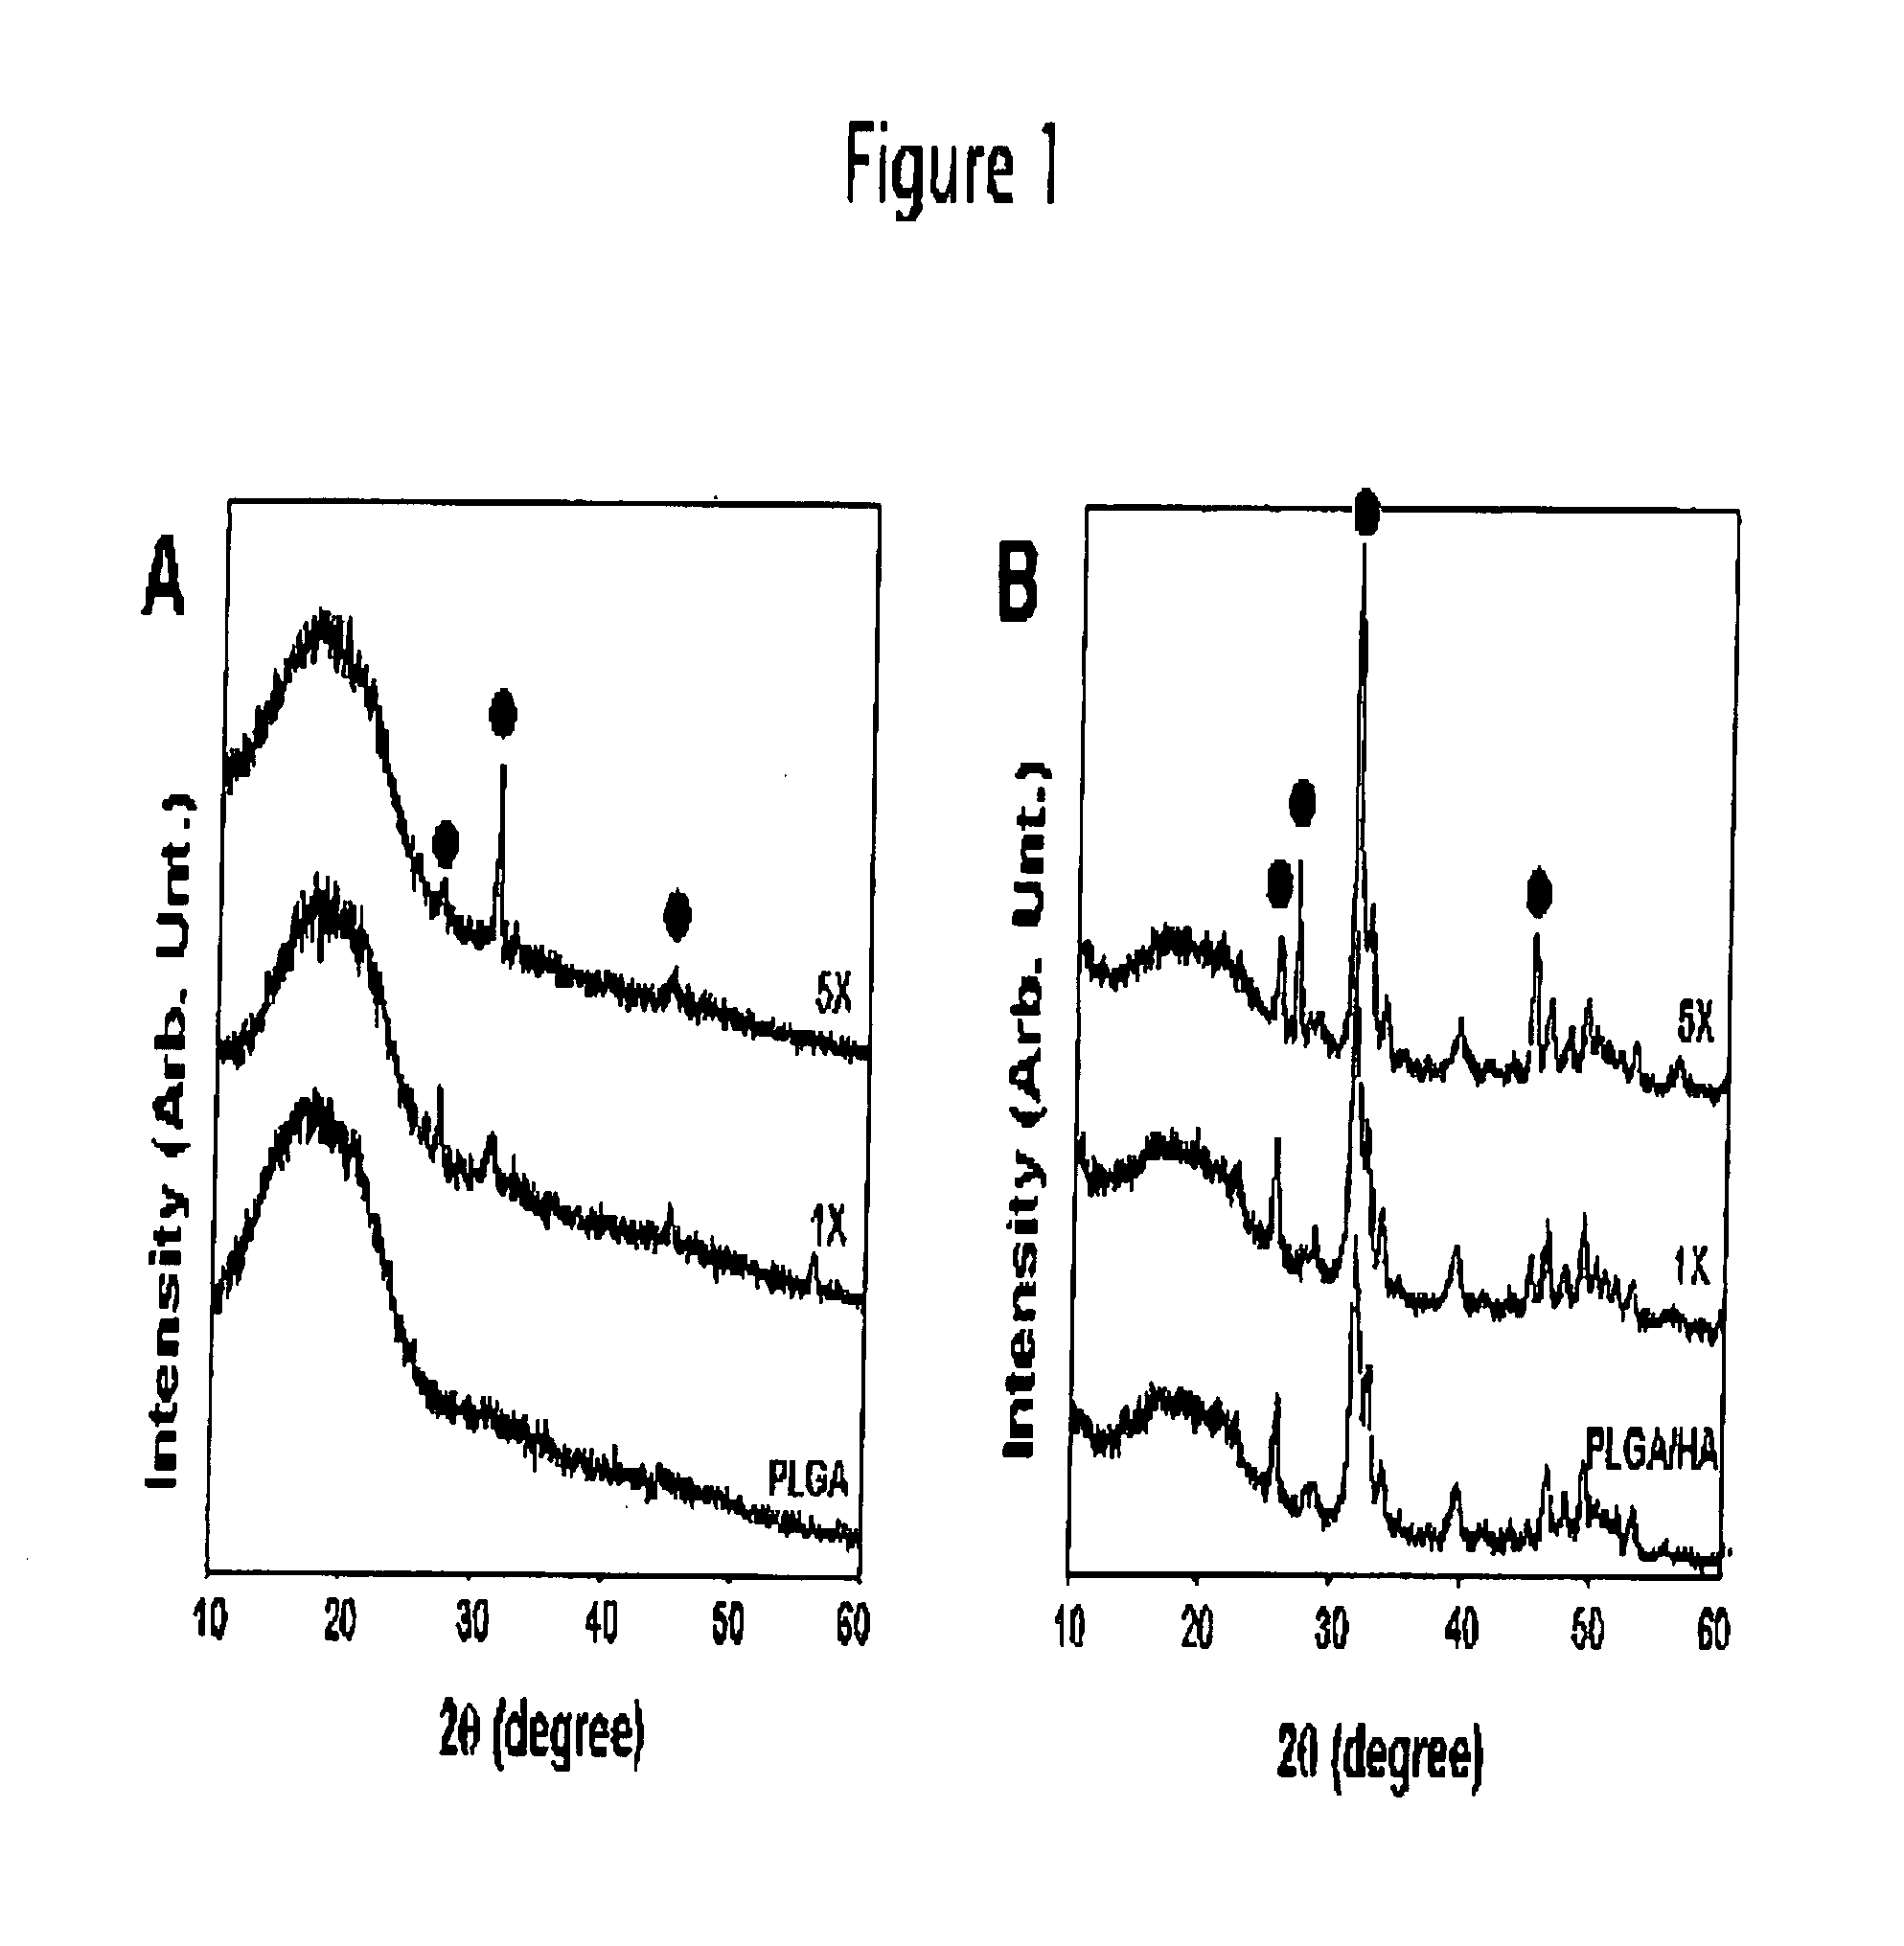 PLGA/hydroxyapatite composite biomaterial and method of making the same